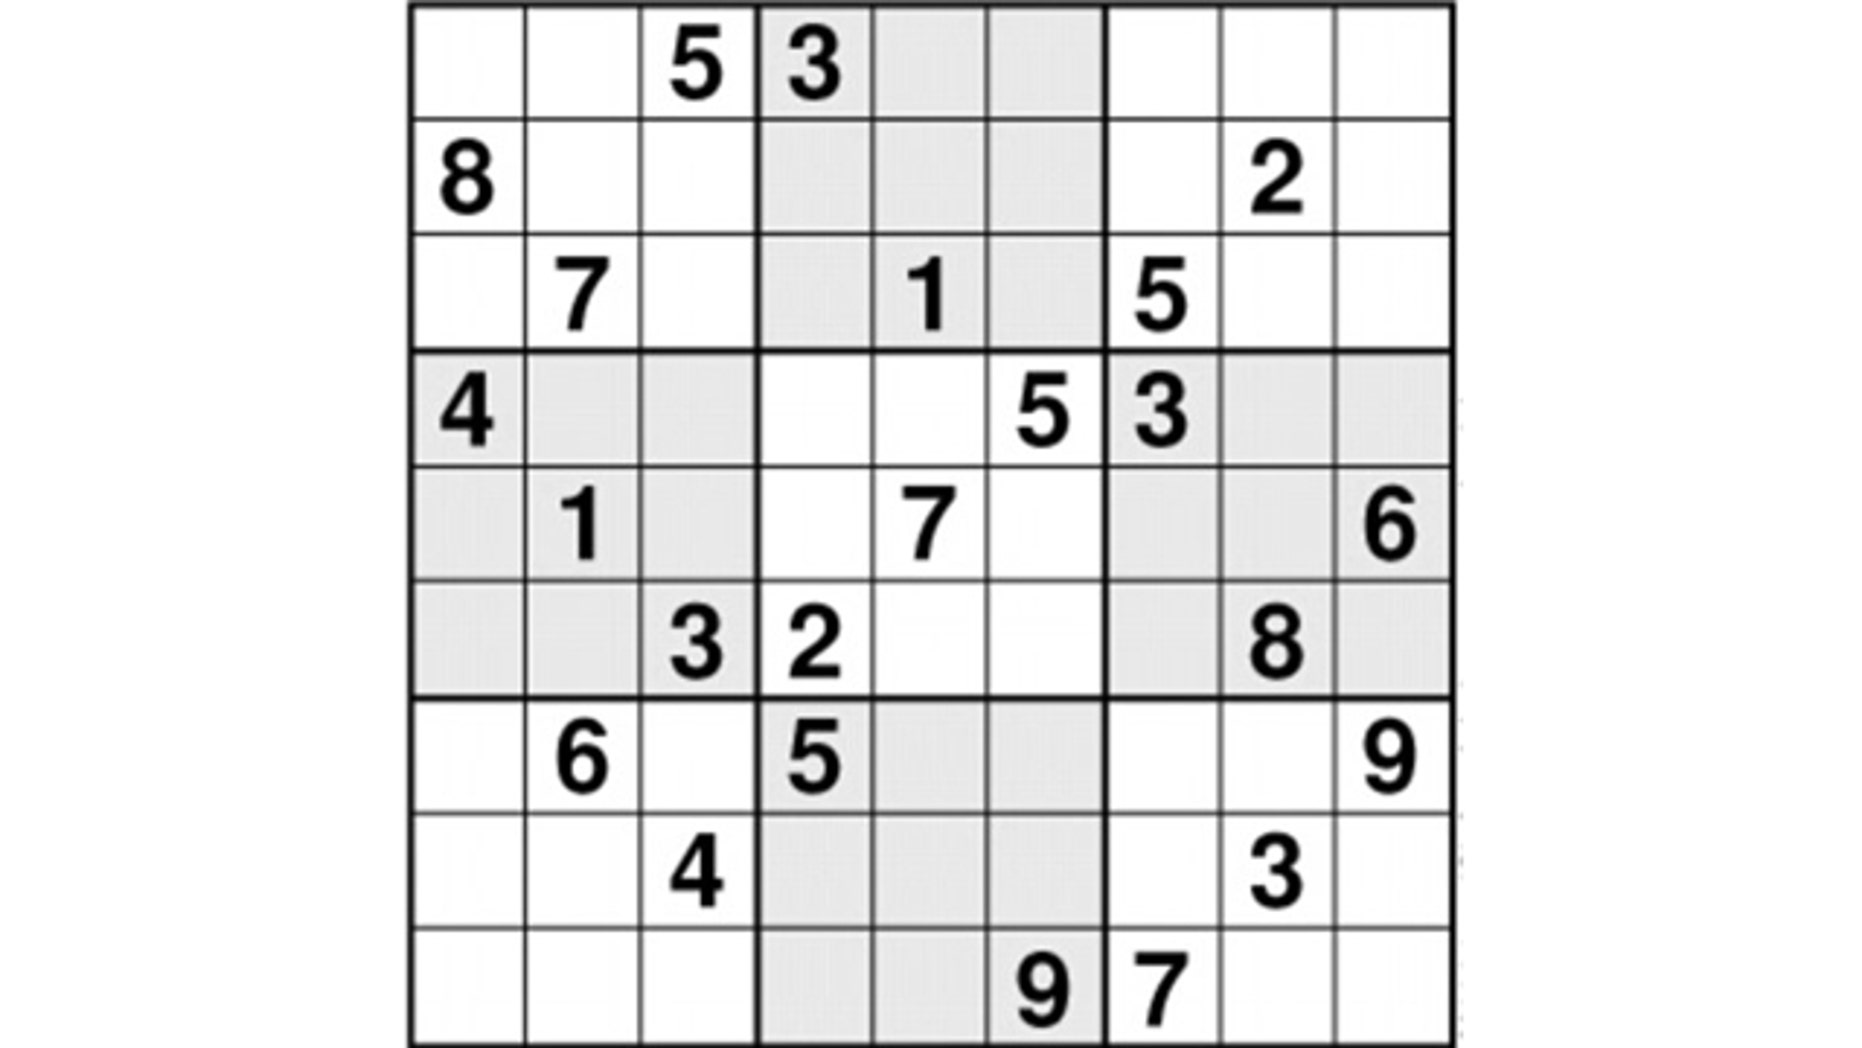 download the last version for mac Sudoku (Oh no! Another one!)